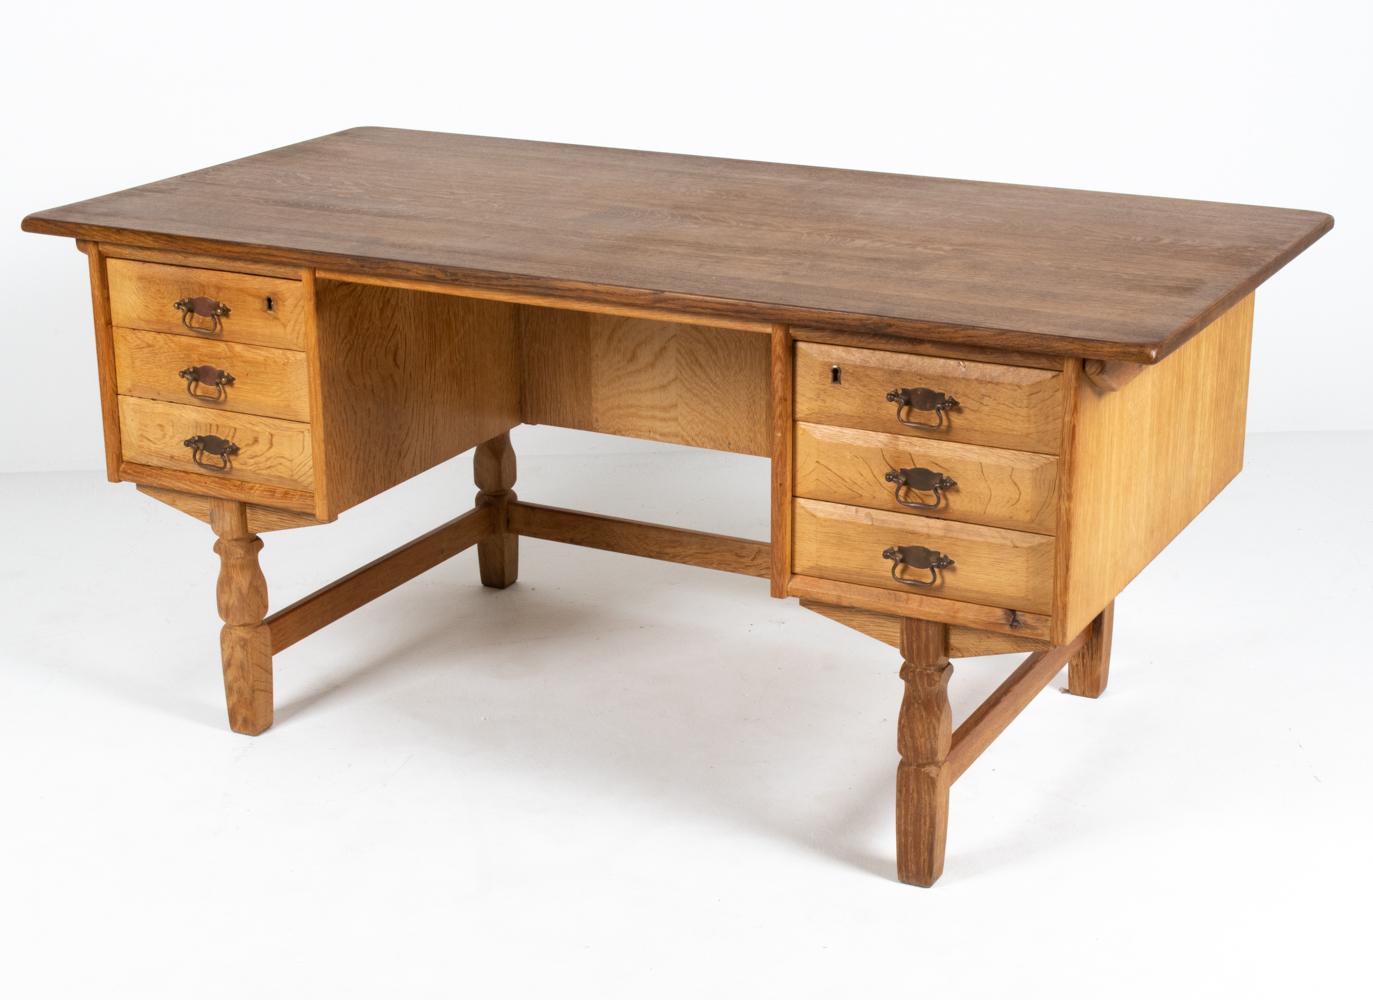 Give your office some modern farmhouse flair with this Danish mid-century desk in carved oak by Henning Kjaernulf. Designed with Kjaernulf's characteristic amalgamation of Baroque-inspired carvings with contemporary appeal, this Scandinavian